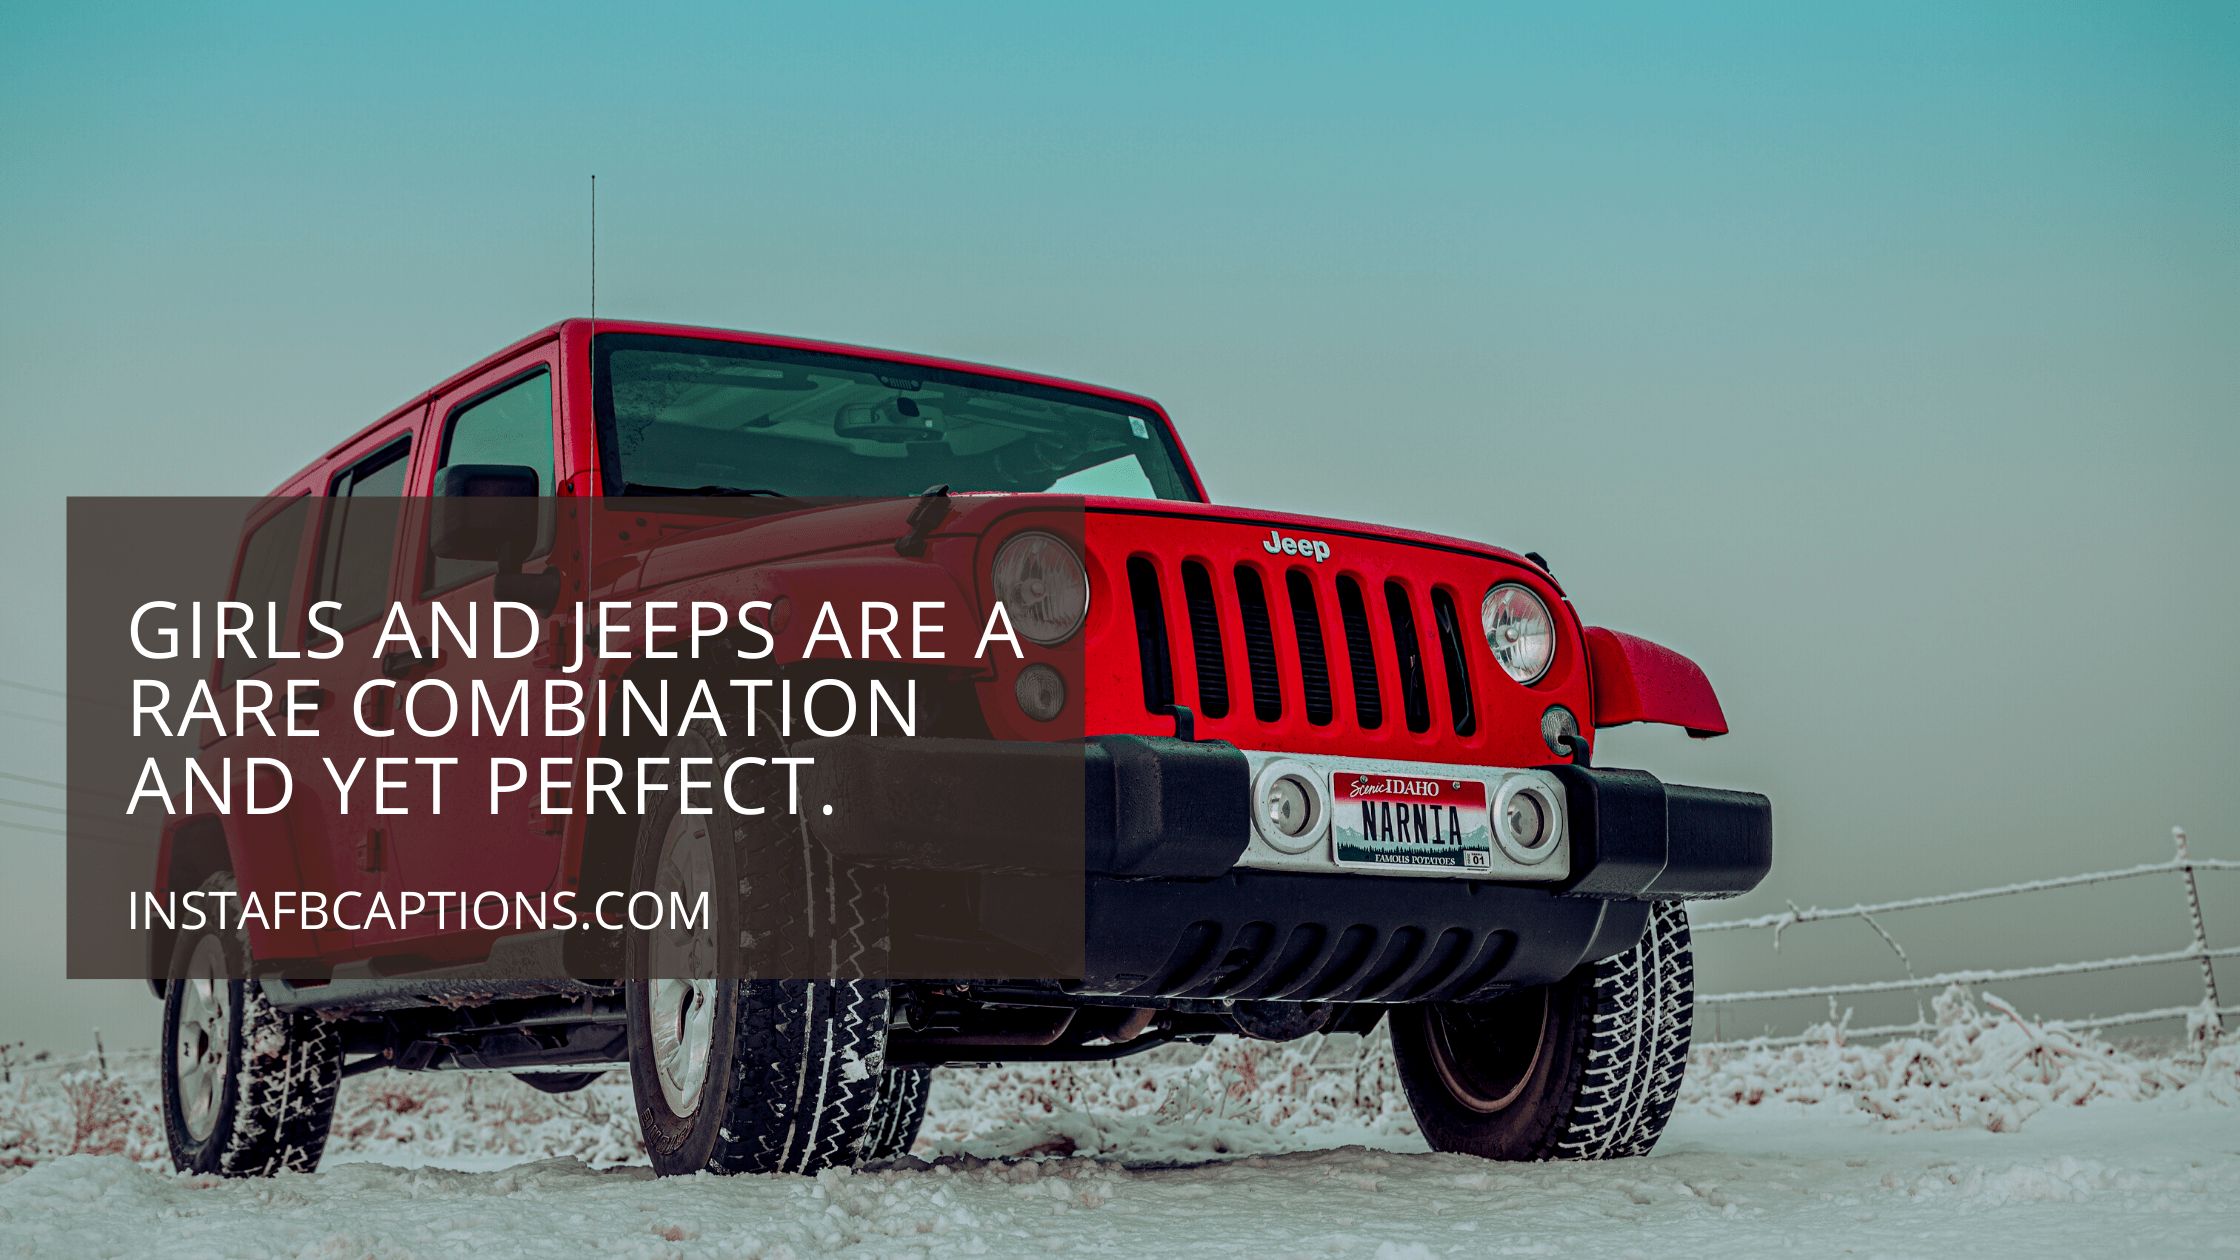 Cute Jeep Captions For Instagram  - Cute Jeep Captions for Instagram  - 92 Jeep Instagram Captions Quotes for 2022